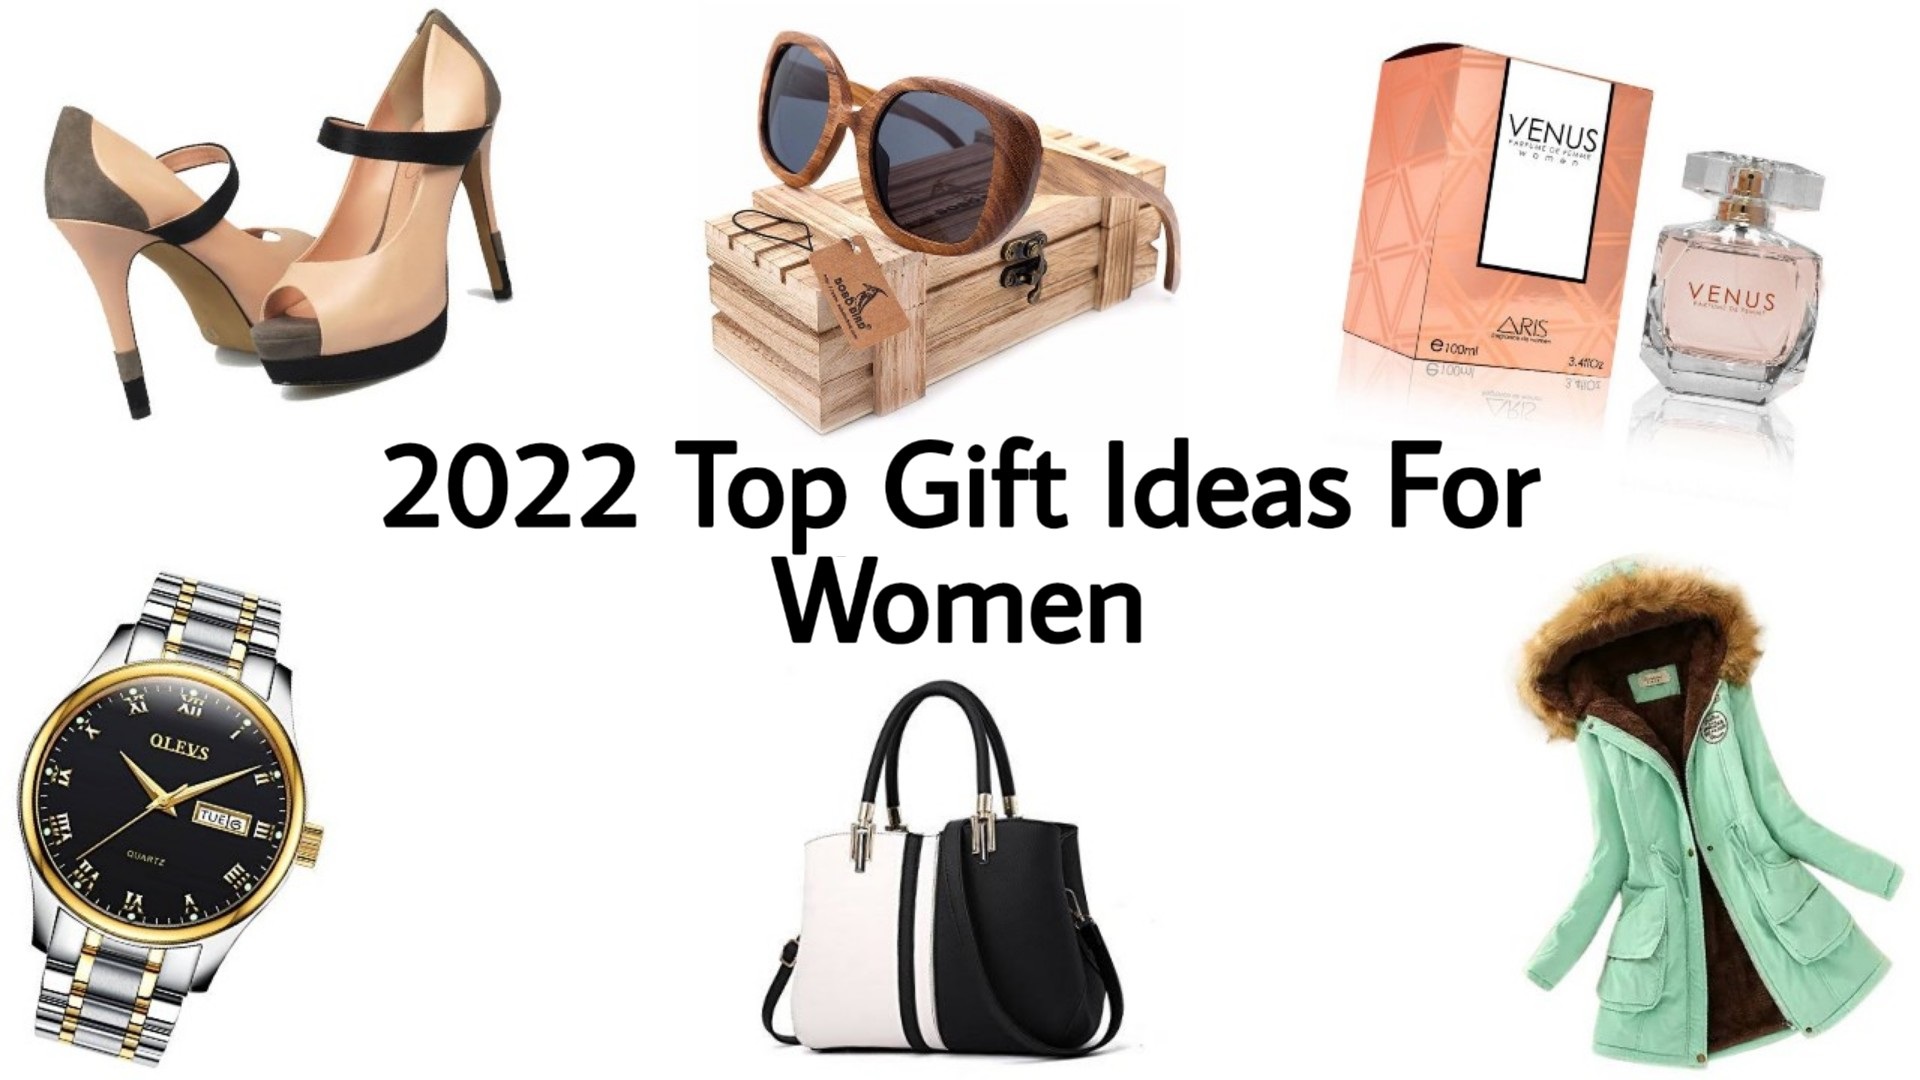 Top Christmas Gift Ideas for Women in 2022